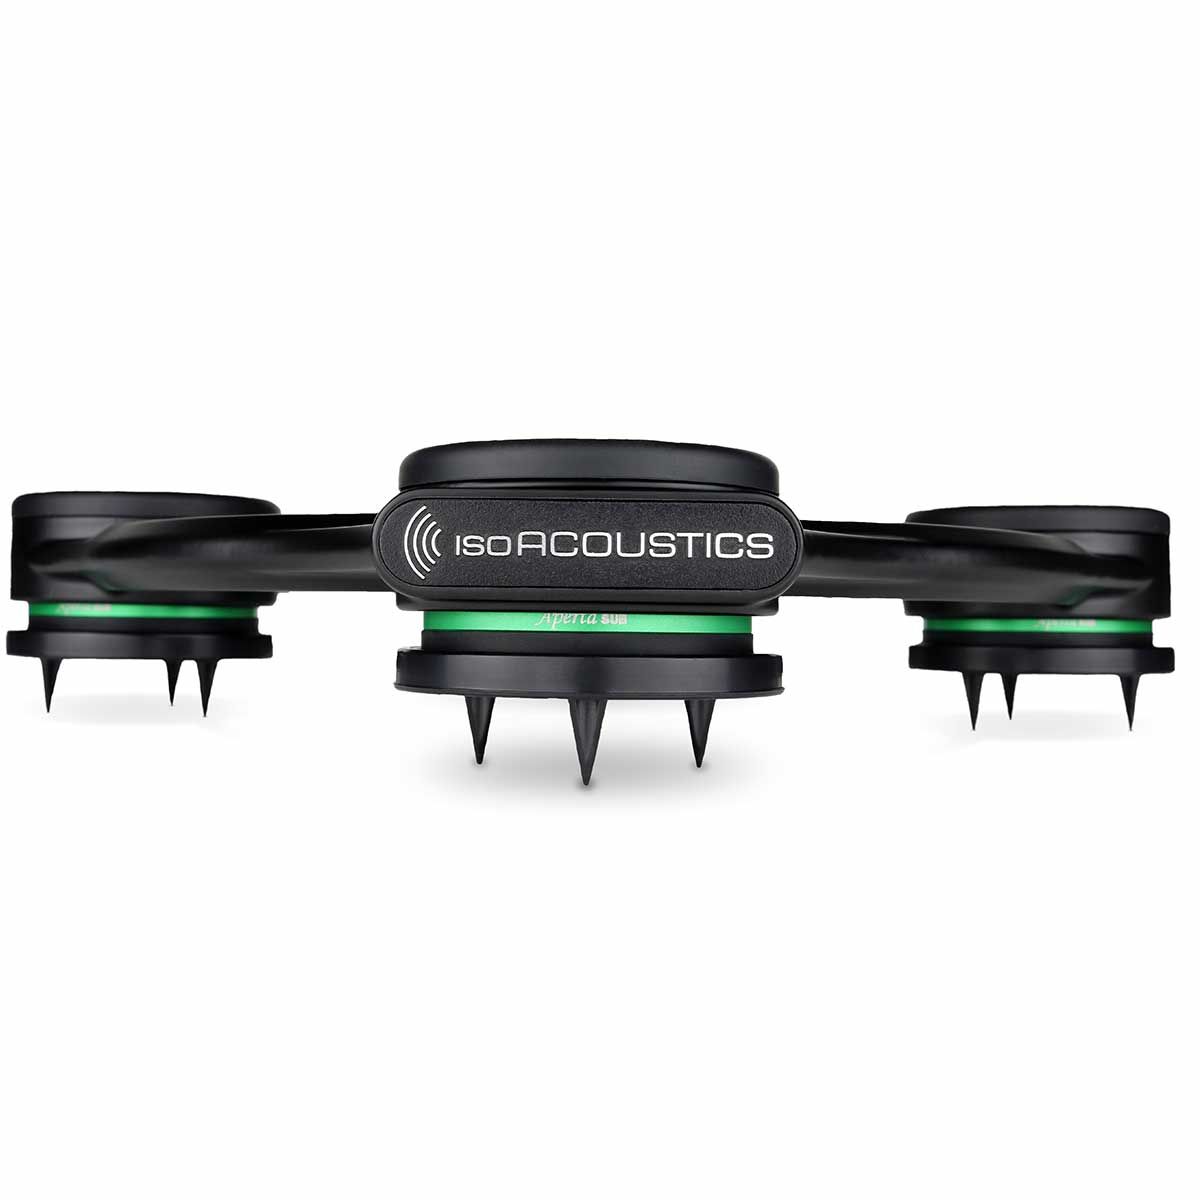 IsoAcoustics Aperta Sub Subwoofer Isolation Stand, front with carpet spikes